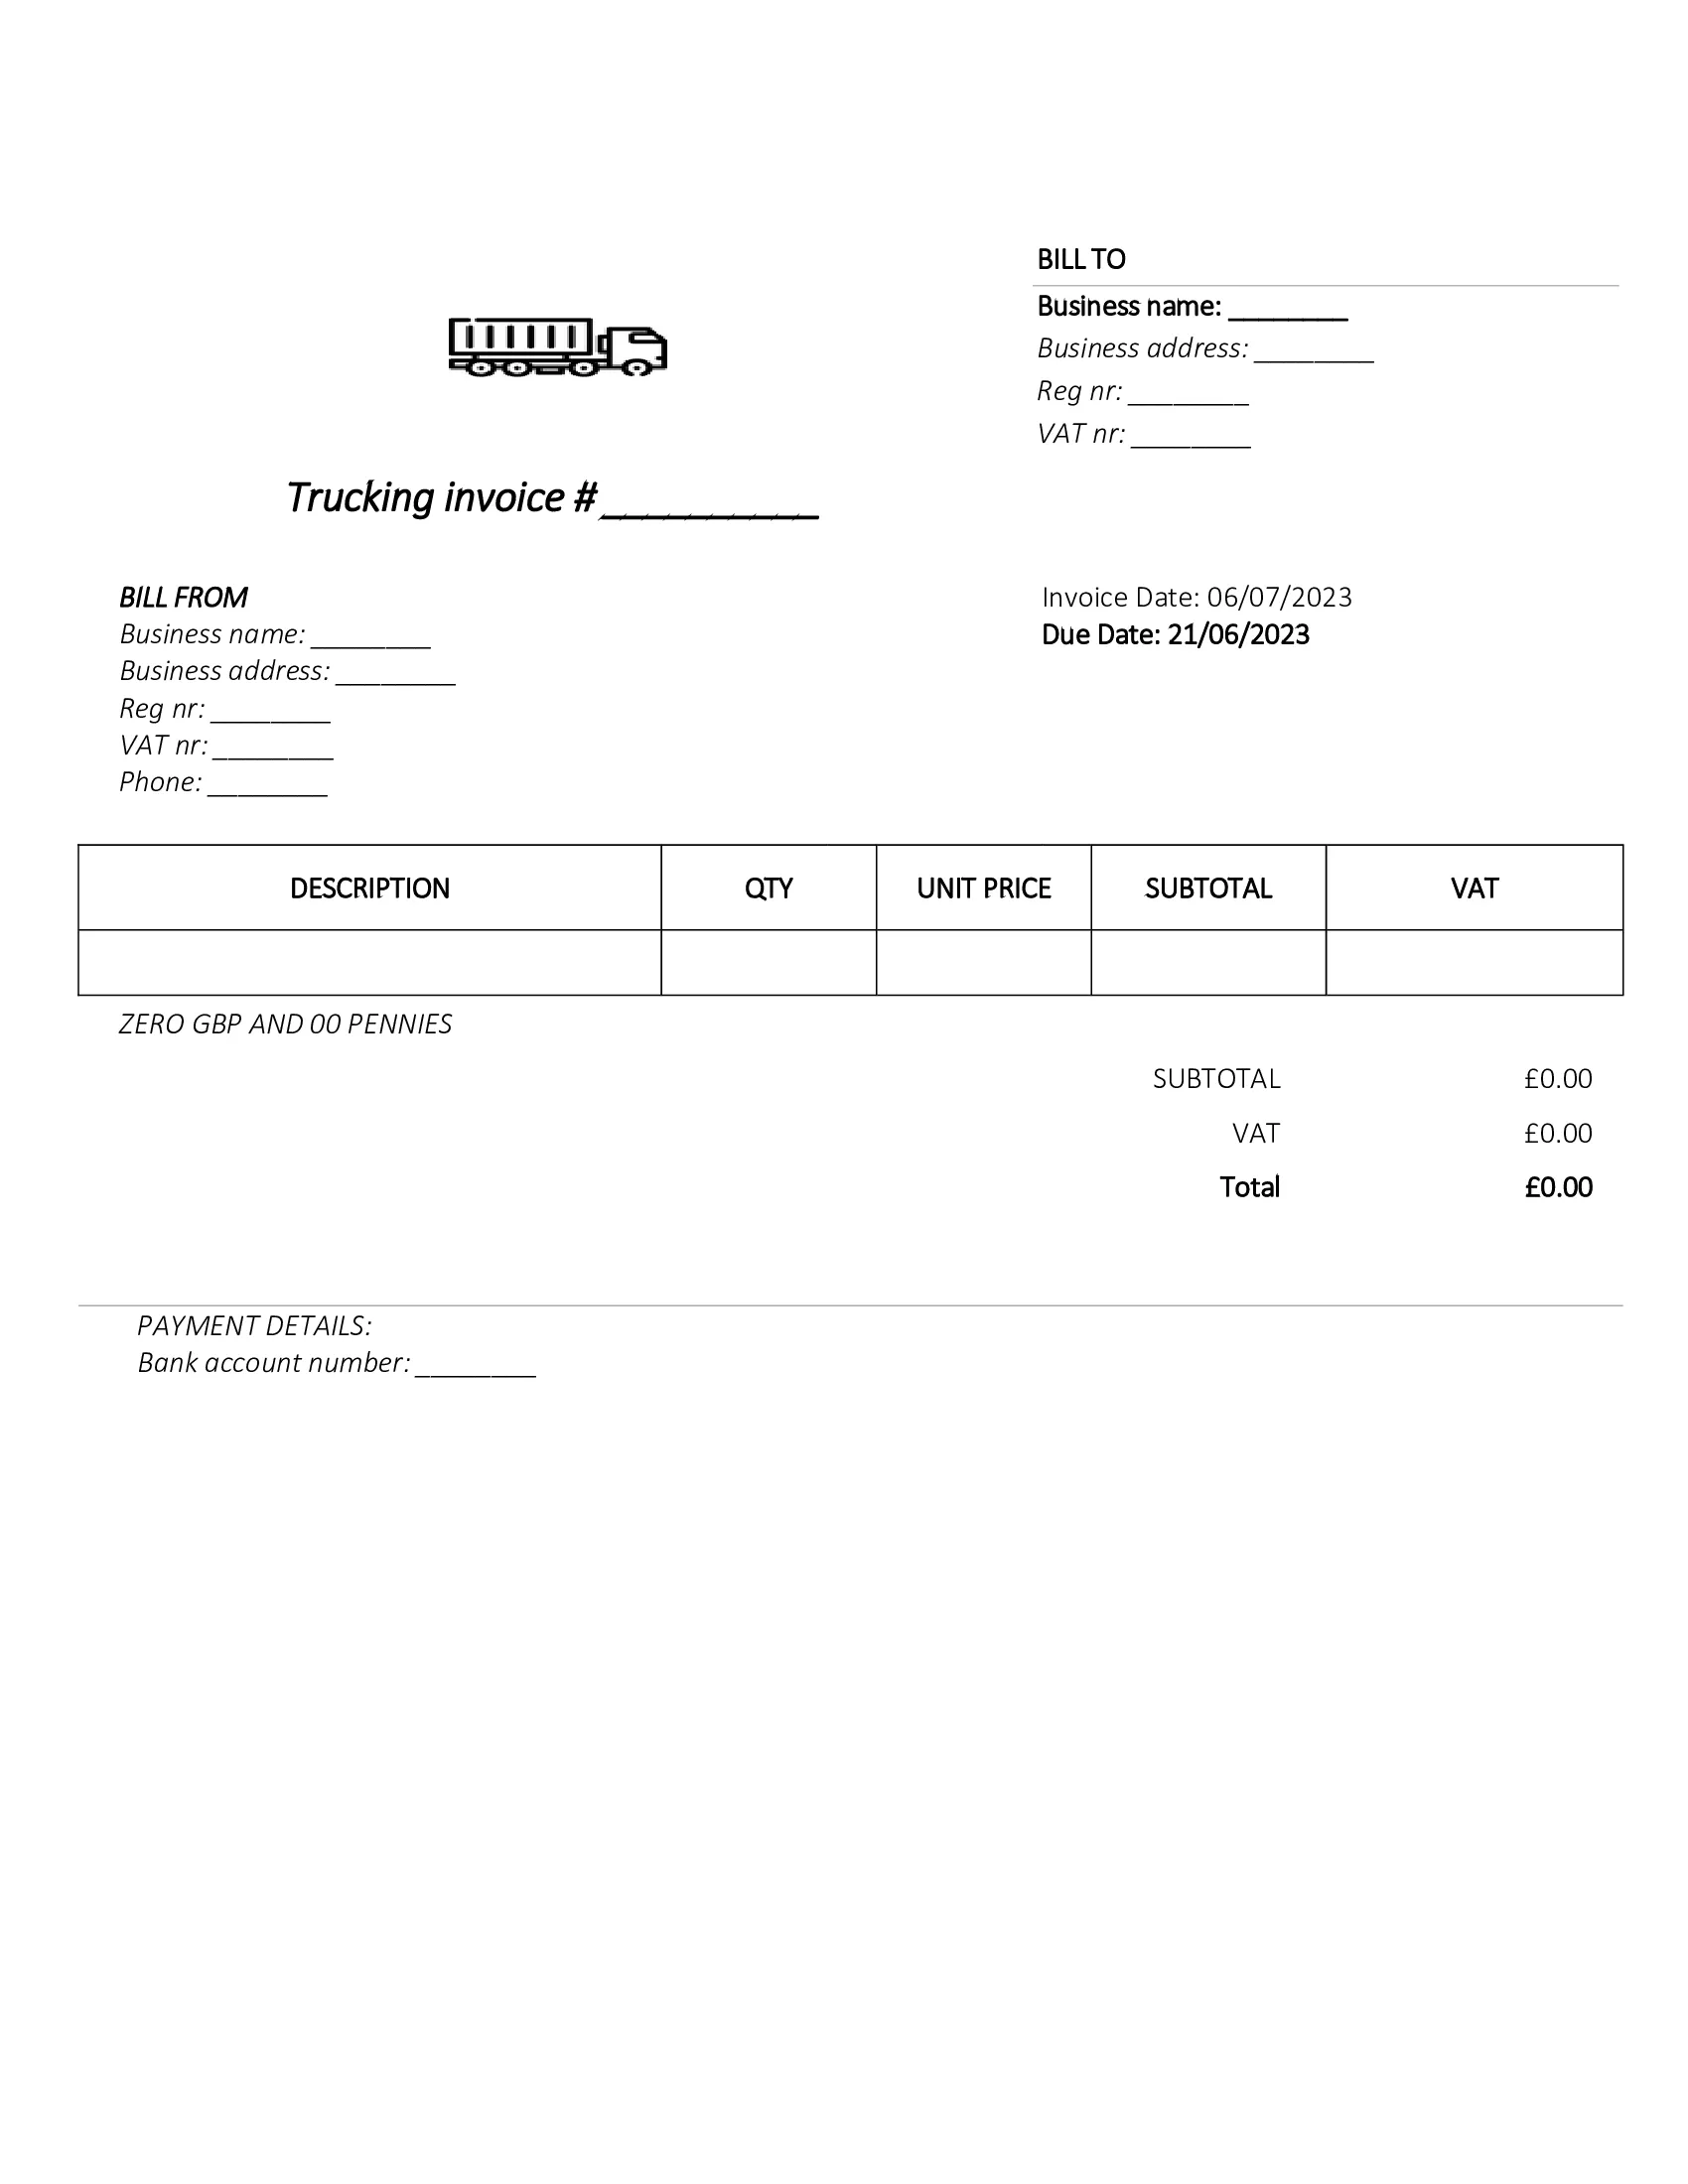 downloadable trucking invoice template UK Word / Google docs